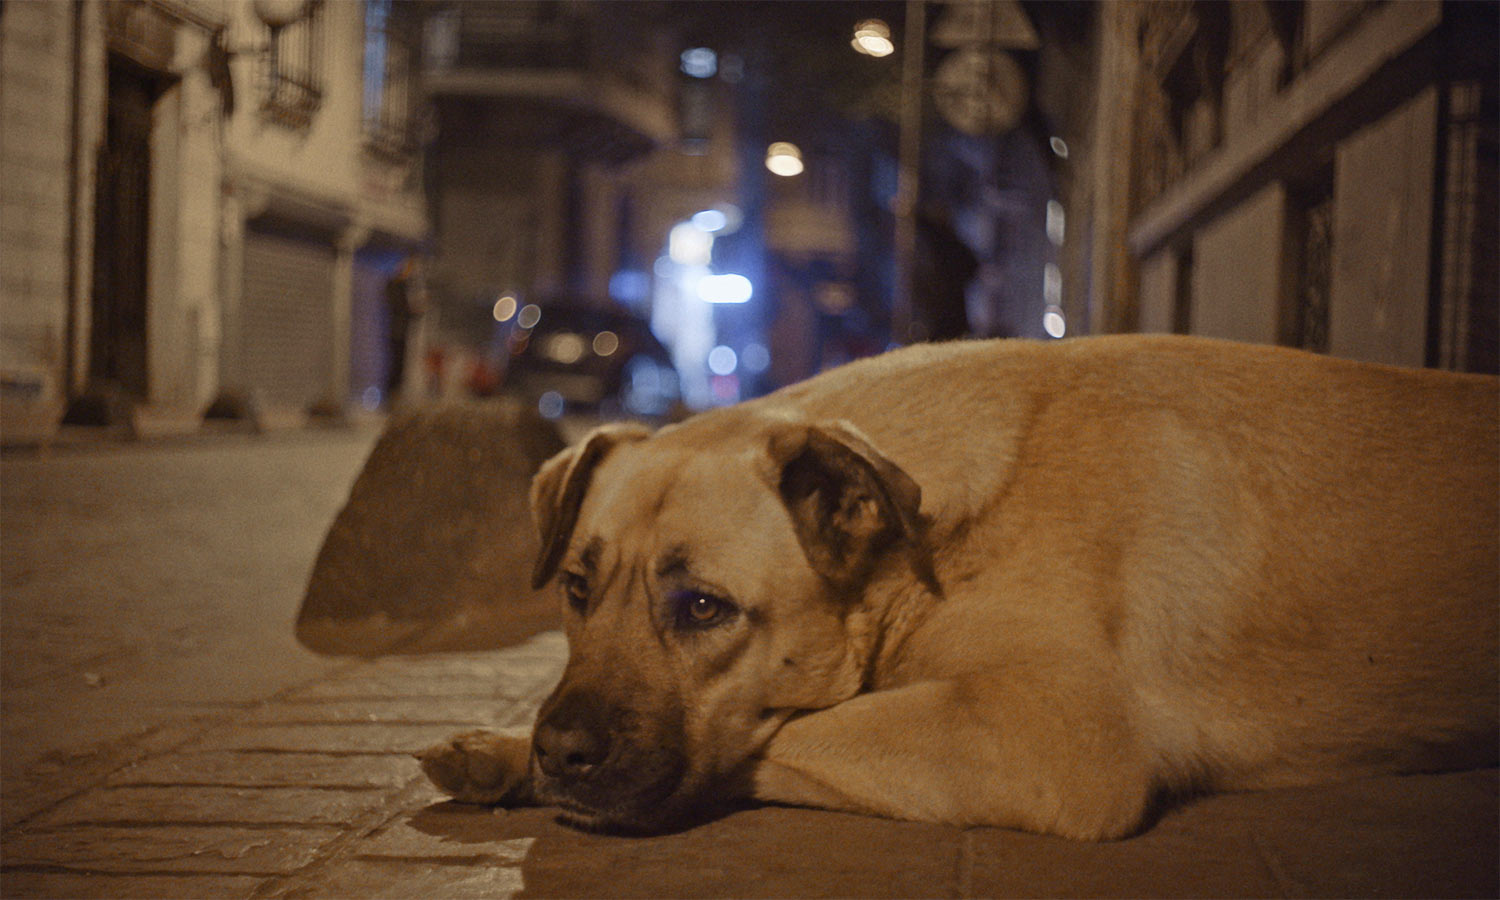 Zeytin, one of the dogs in Elizabeth Lo's 'Stray.' is lost in thought after a fight. Courtesy of Magnolia Pictures and Elizabeth Lo